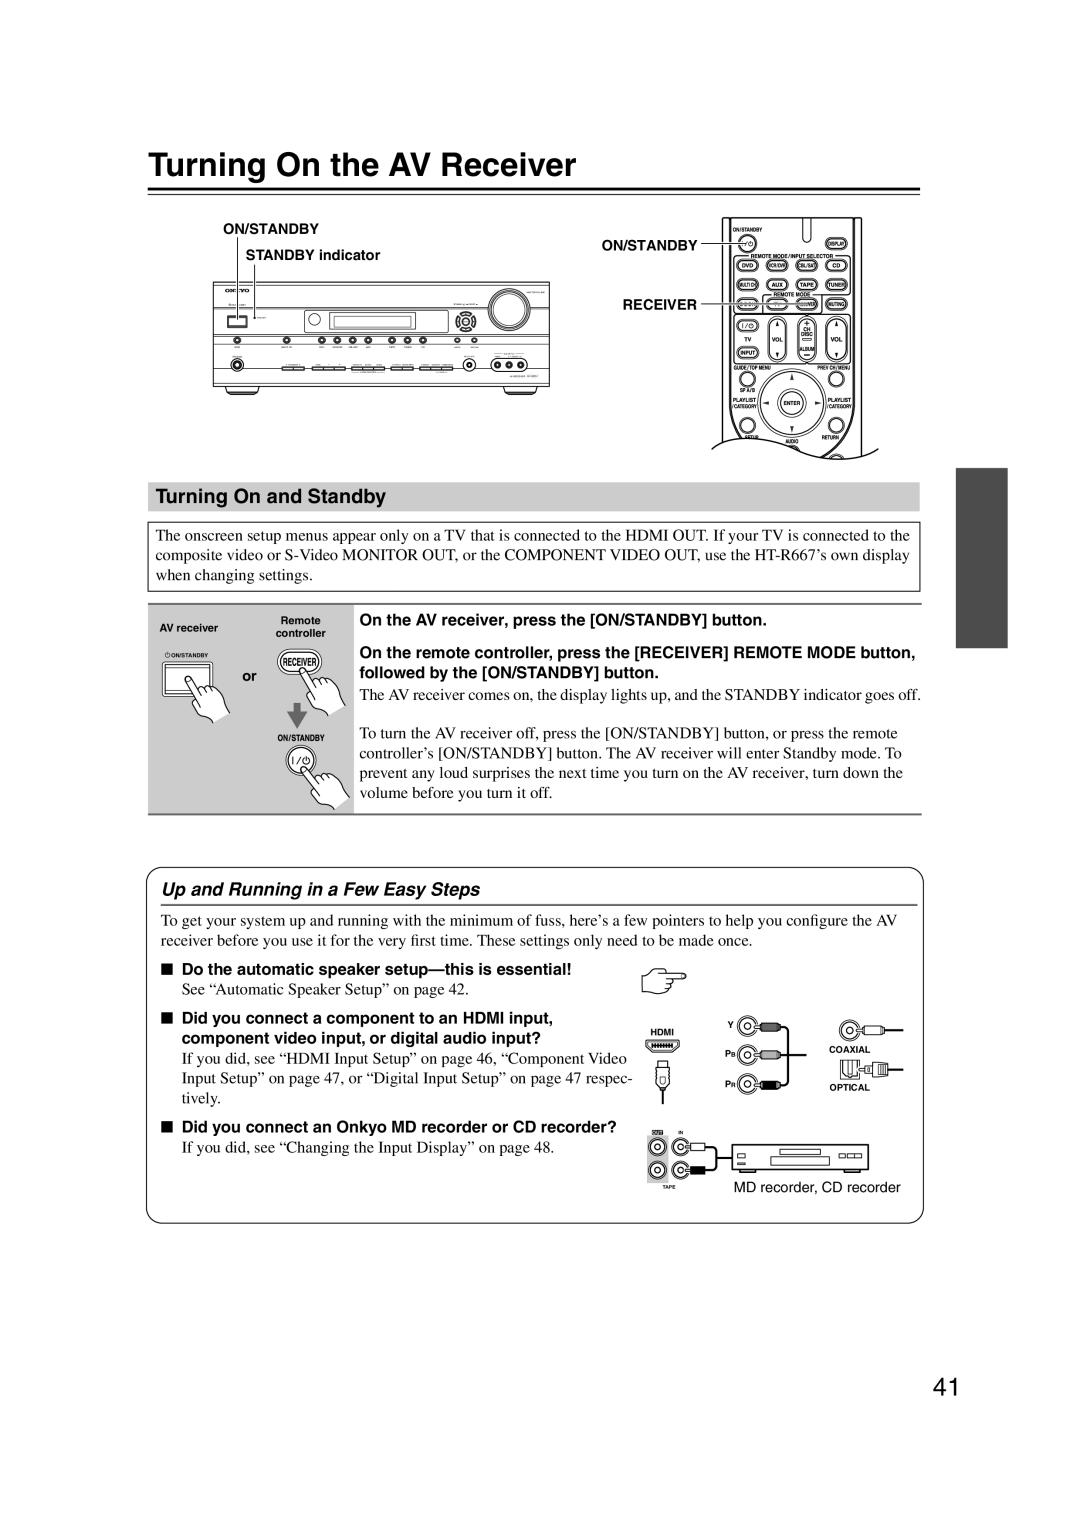 Onkyo HT-S6100 instruction manual Turning On the AV Receiver, Turning On and Standby, Up and Running in a Few Easy Steps 